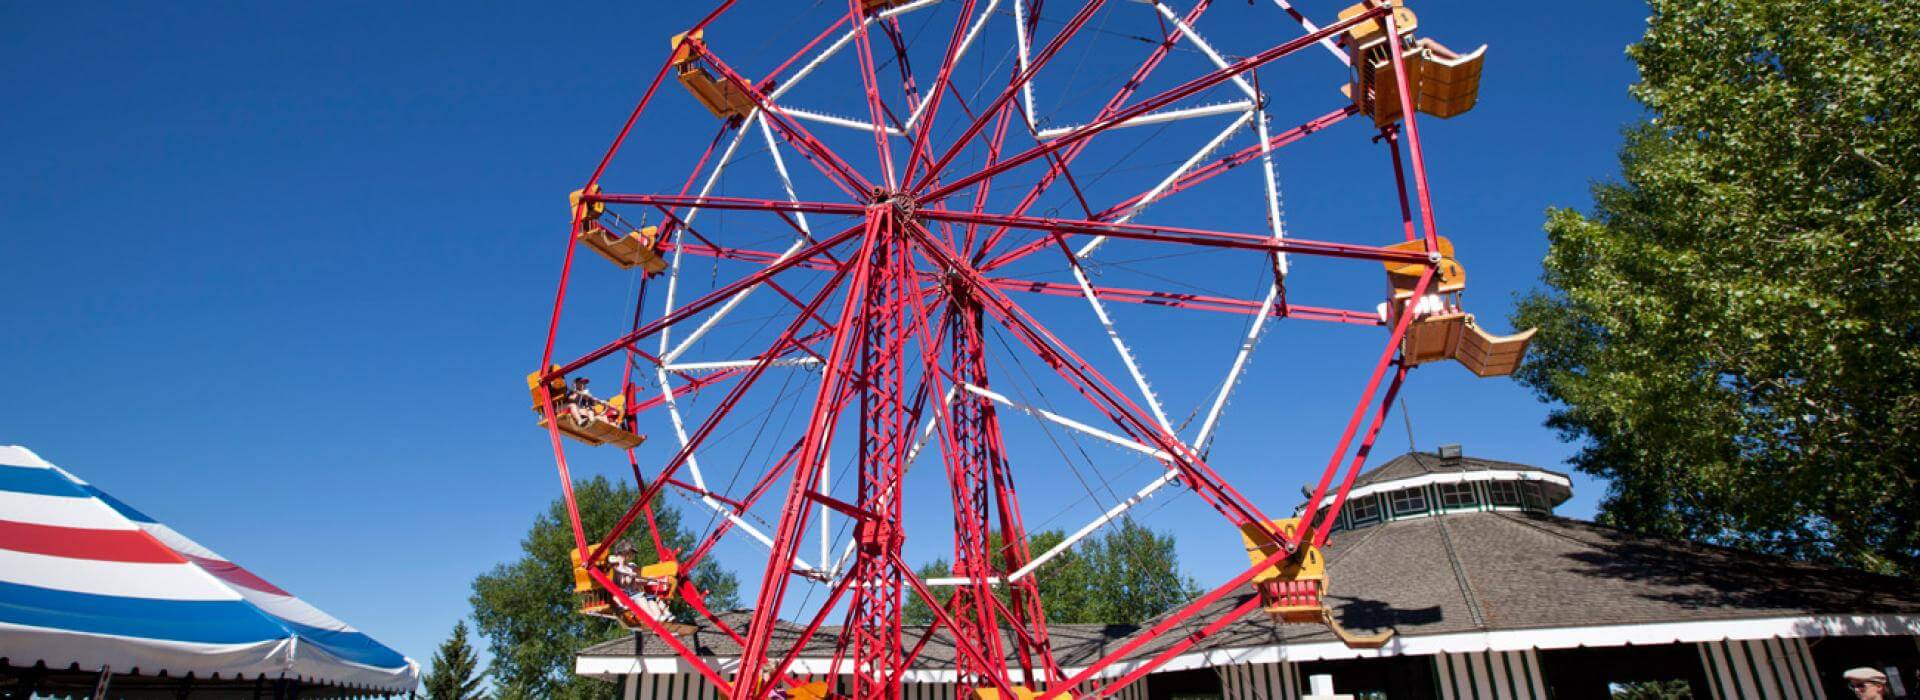 Large Ferris wheel with sky in background